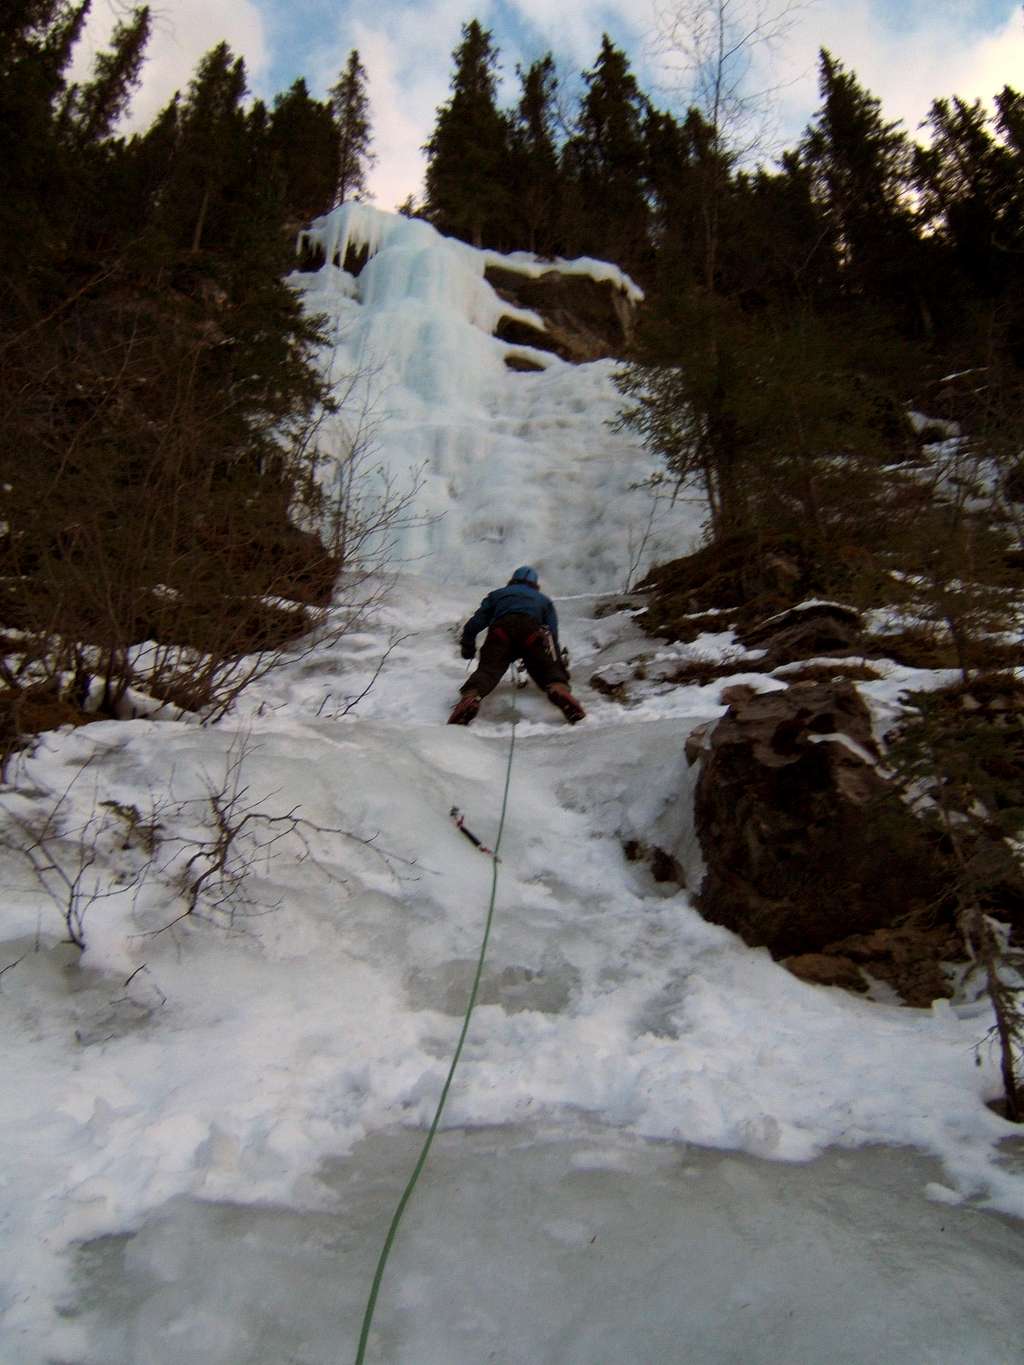 The Rolling Ice on the First Pitch of folding Curtain - Hinton